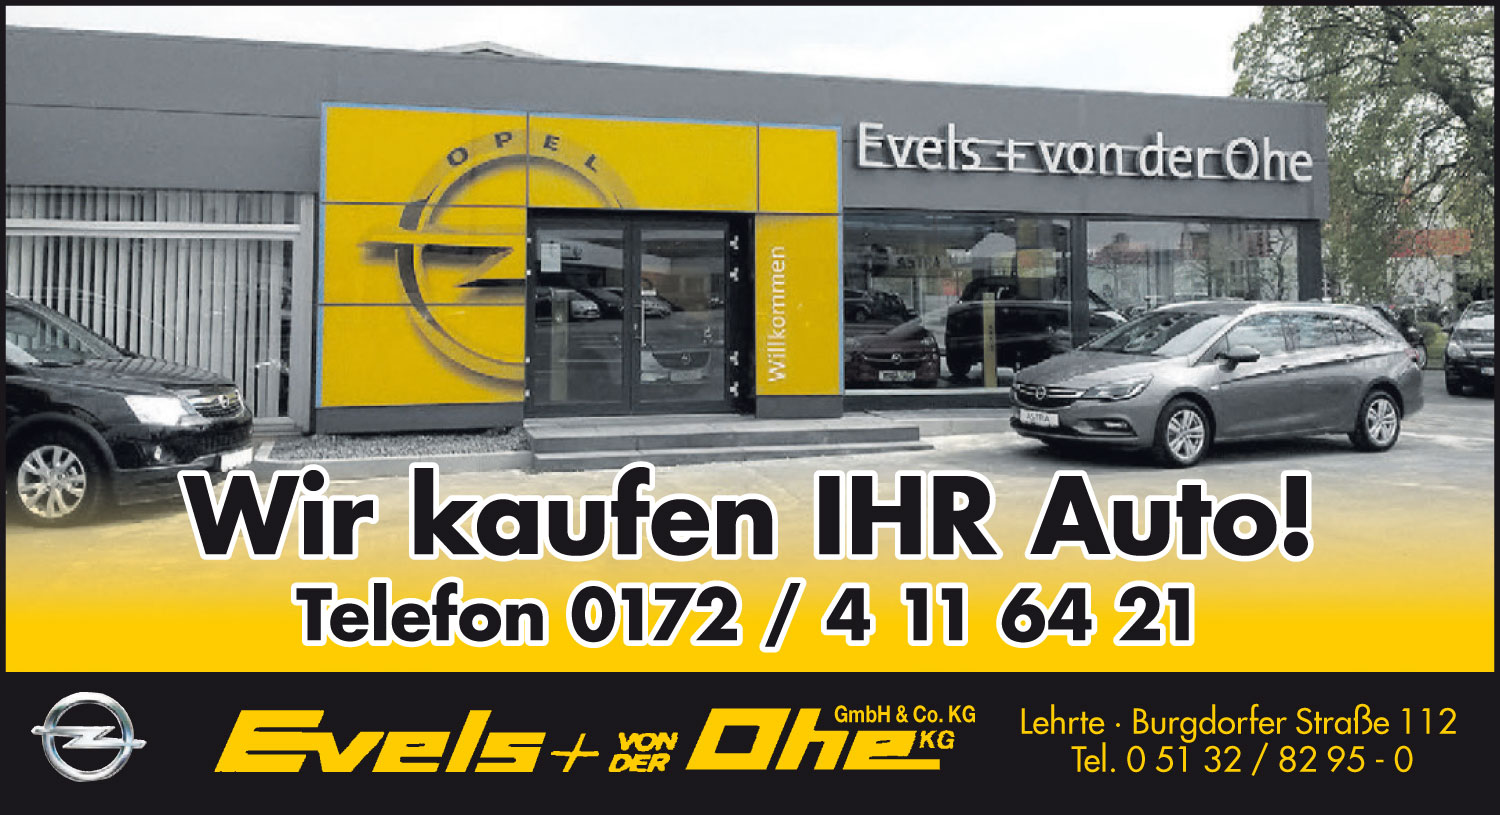 Evels und v.d. Ohe GmbH & Co. KG